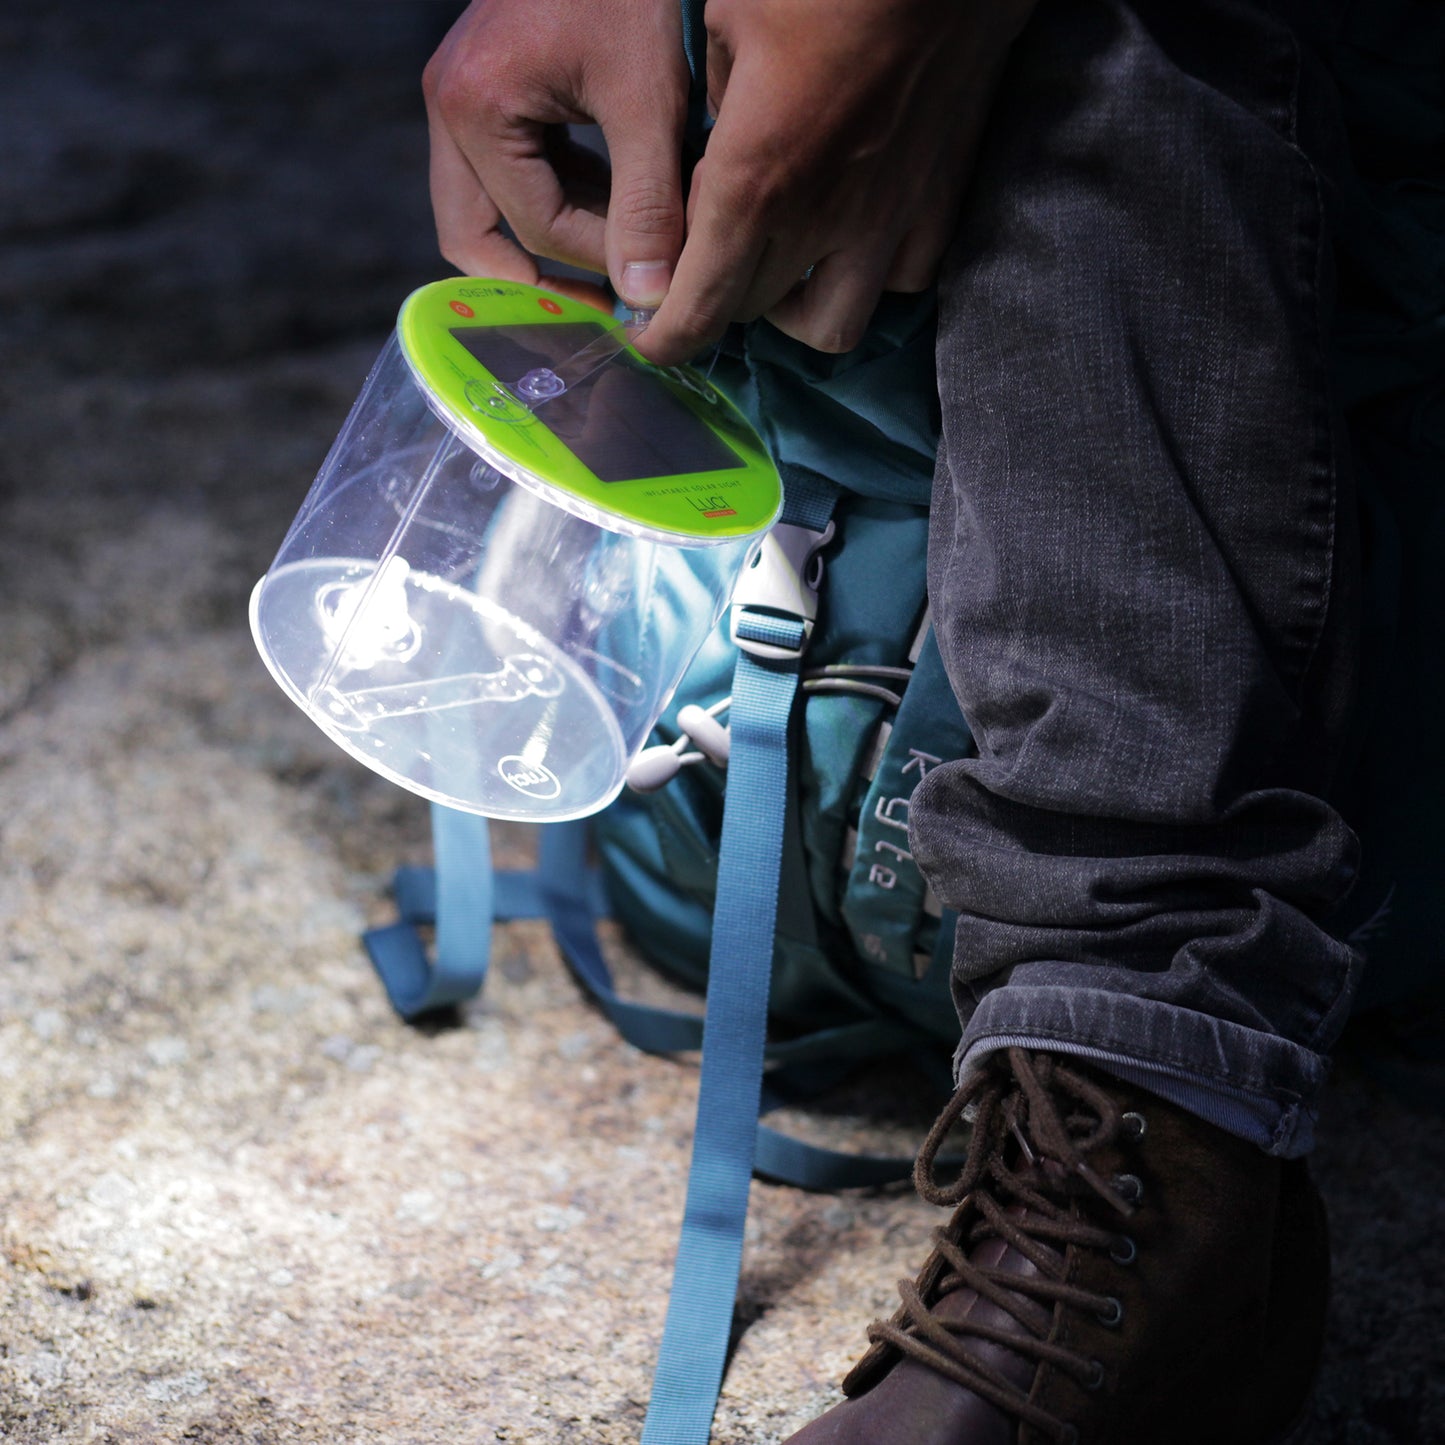 Person holding a rechargeable Luci solar light, lit at night. It is near the ground, illuminating their backpack, jeans, and hiking boots.